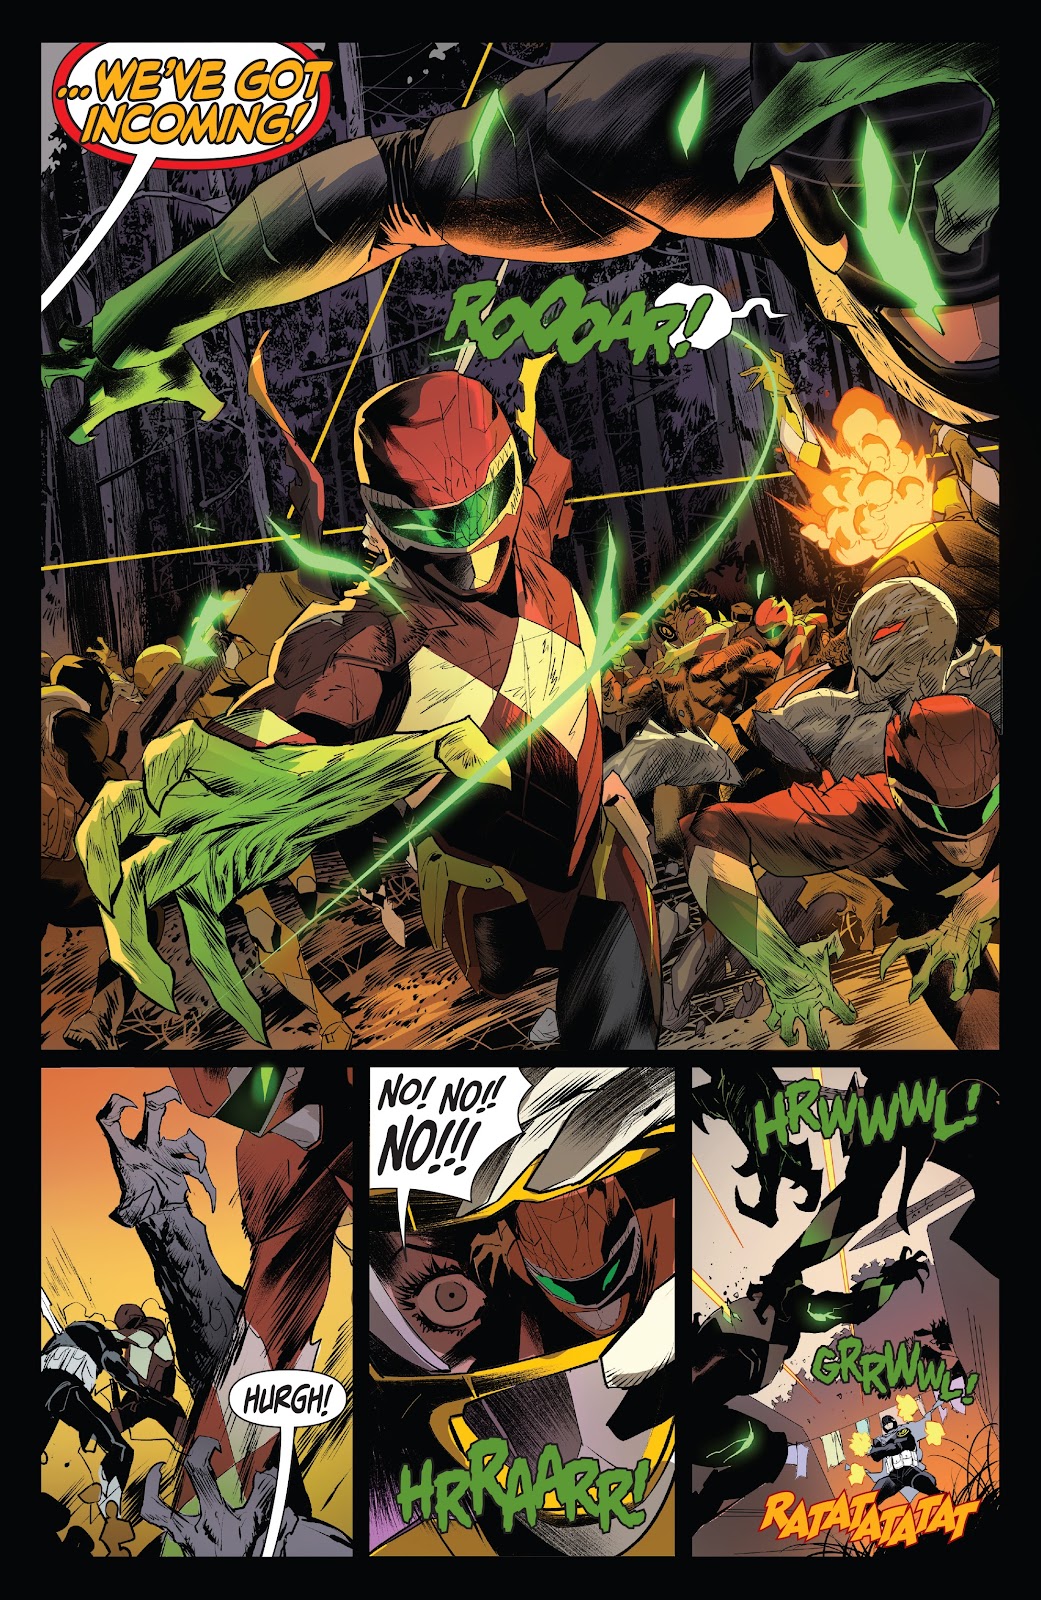 Power Rangers: Ranger Slayer issue 1 - Page 6